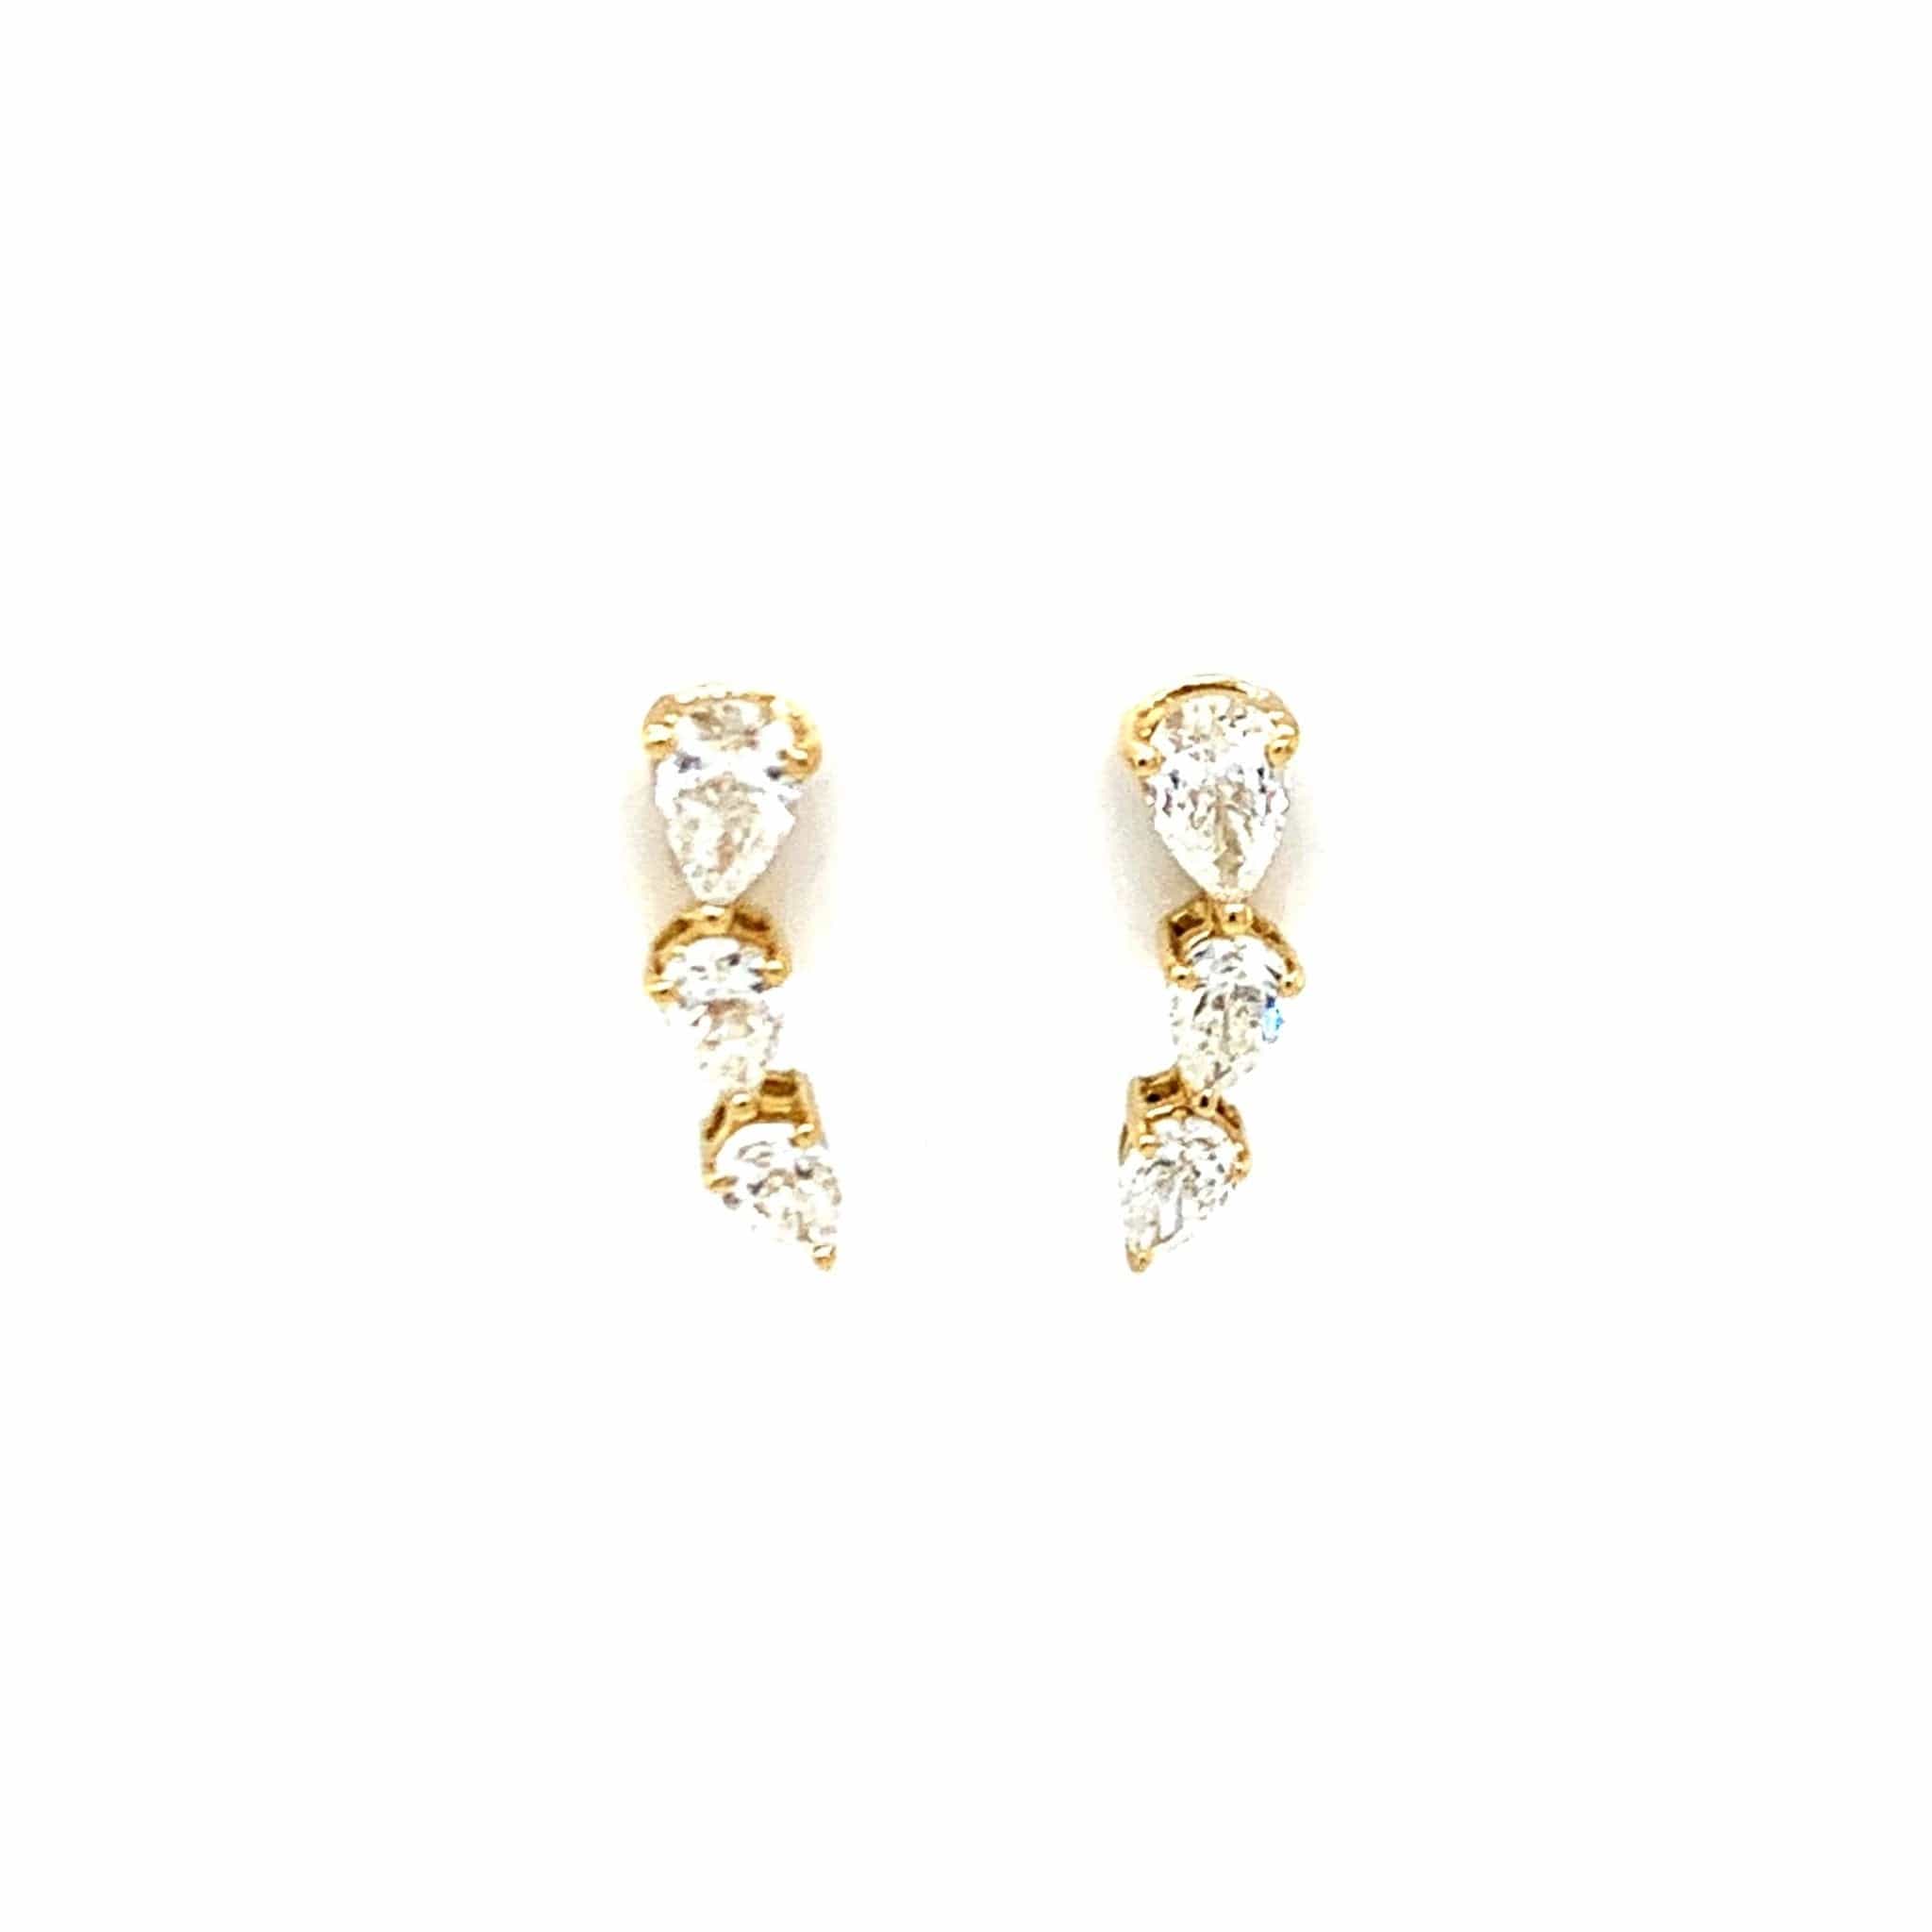 M.Fitaihi Everyday Sparkle - Yellow Gold with Diamonds Earrings - M.Fitaihi